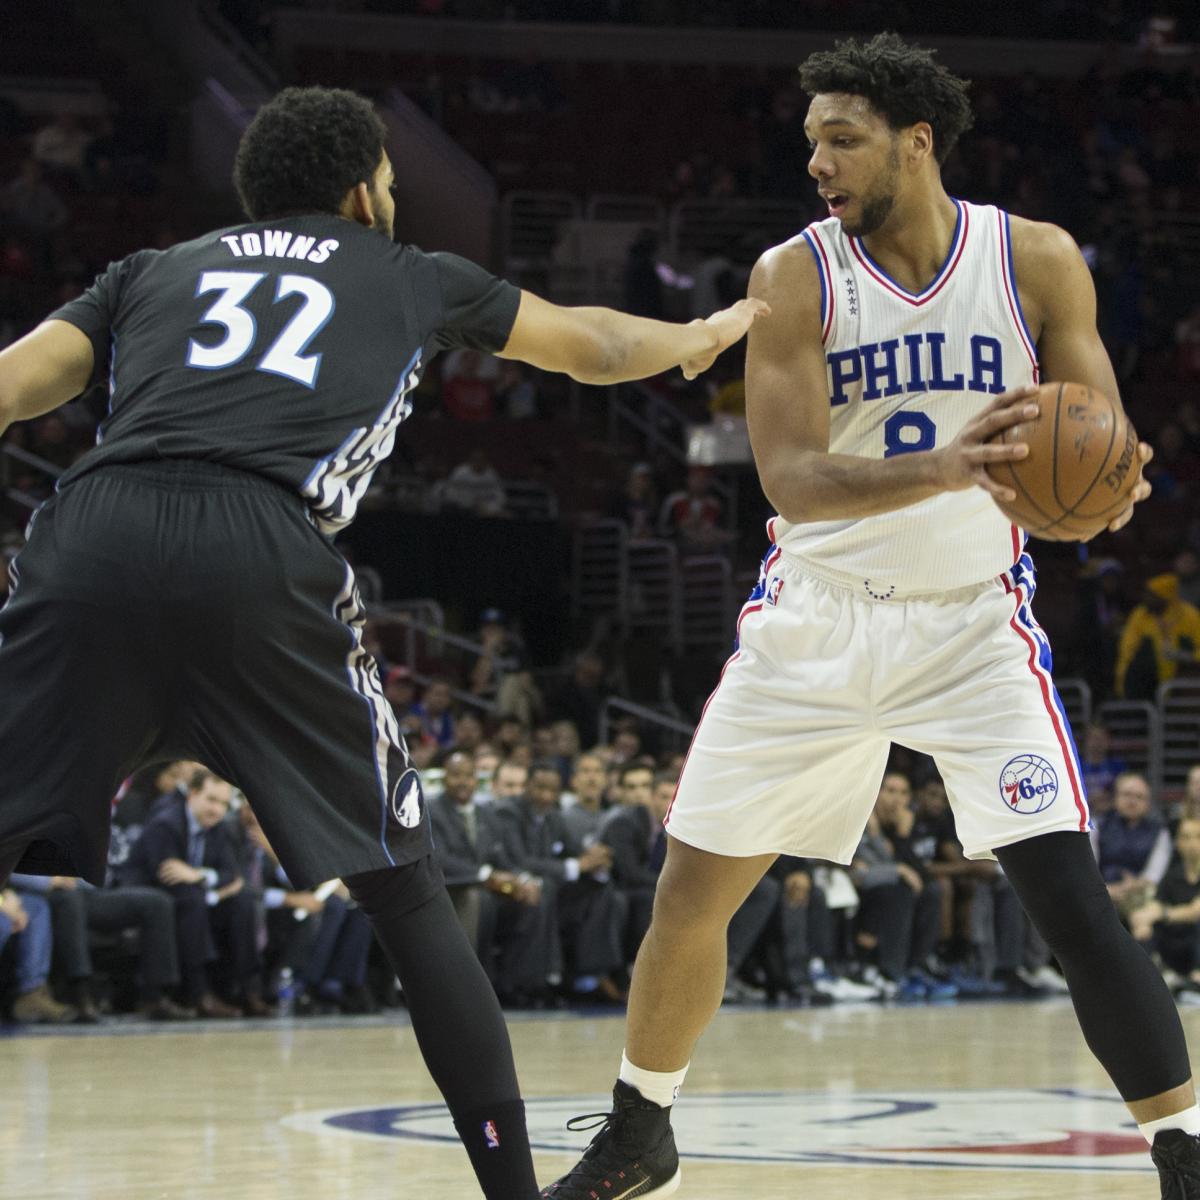 Timberwolves vs. 76ers Score, Video Highlights and Recap from Jan. 4